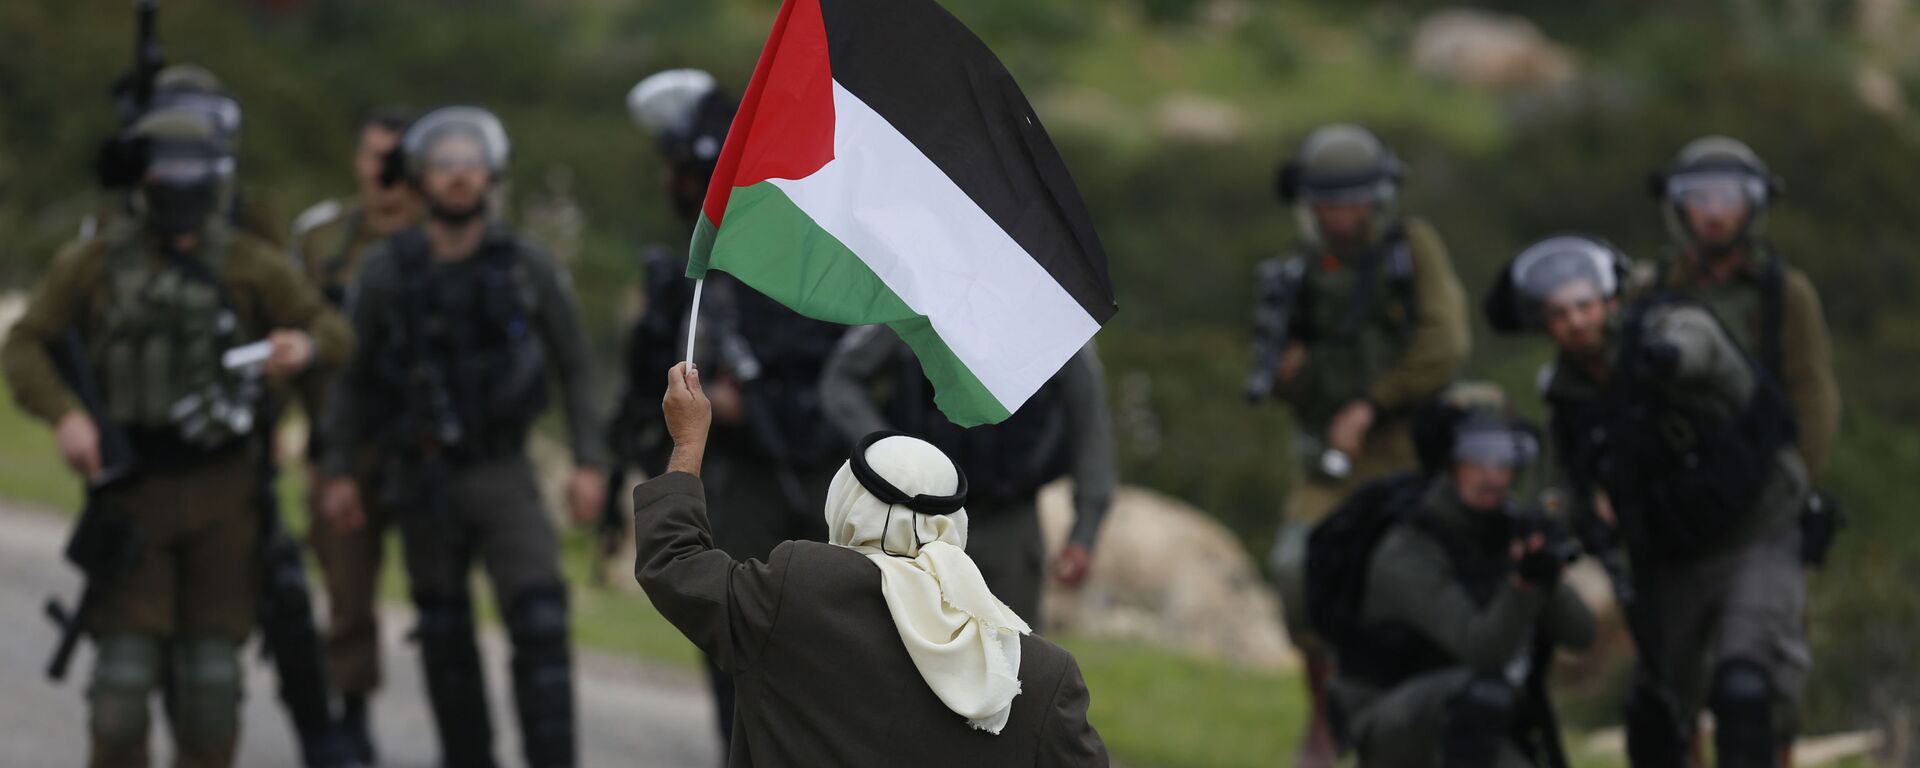 A Palestinian demonstrator holds a national flags in front of Israeli forces as they protest against President Donald Trump's Mideast initiative, in Jordan Valley in the West Bank, Tuesday, Feb. 25, 2020 - Sputnik International, 1920, 22.05.2024